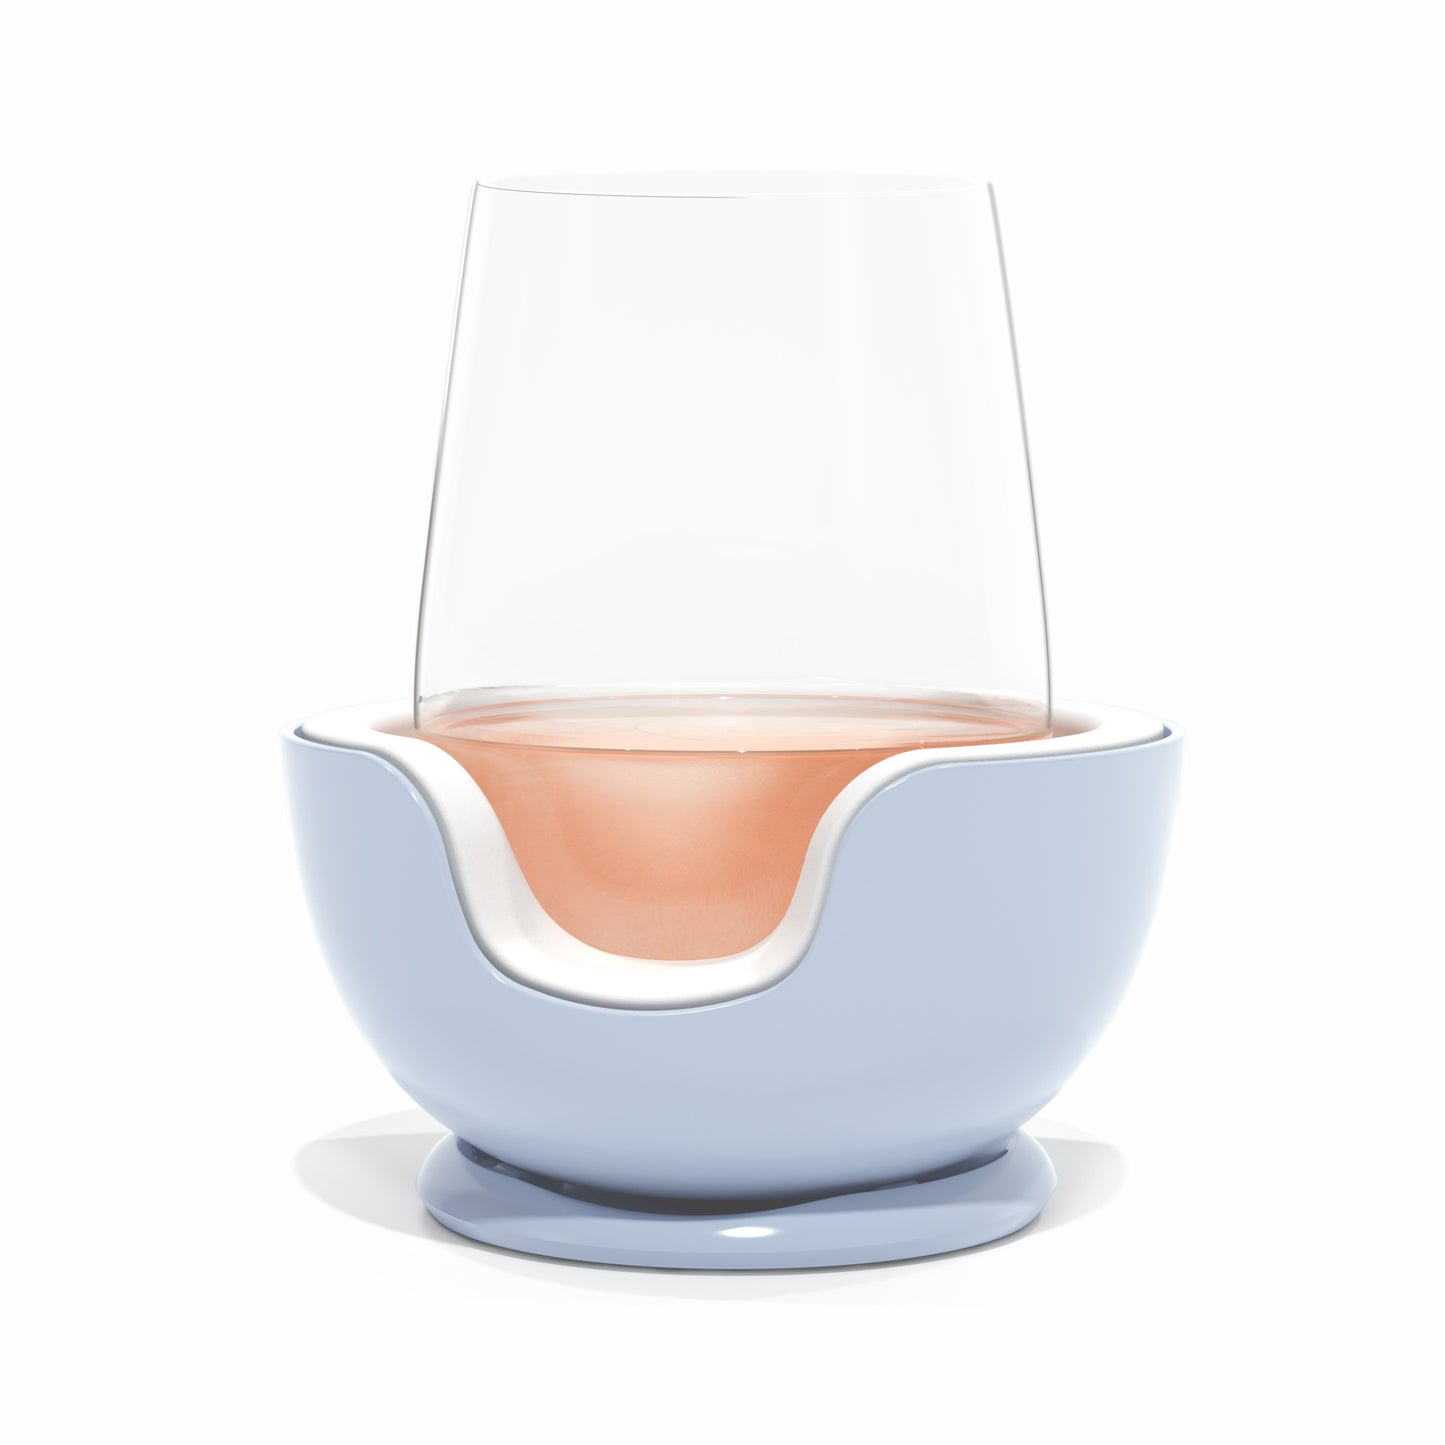 The 7 Best Stemless Wine Glasses of 2023, Tested & Reviewed